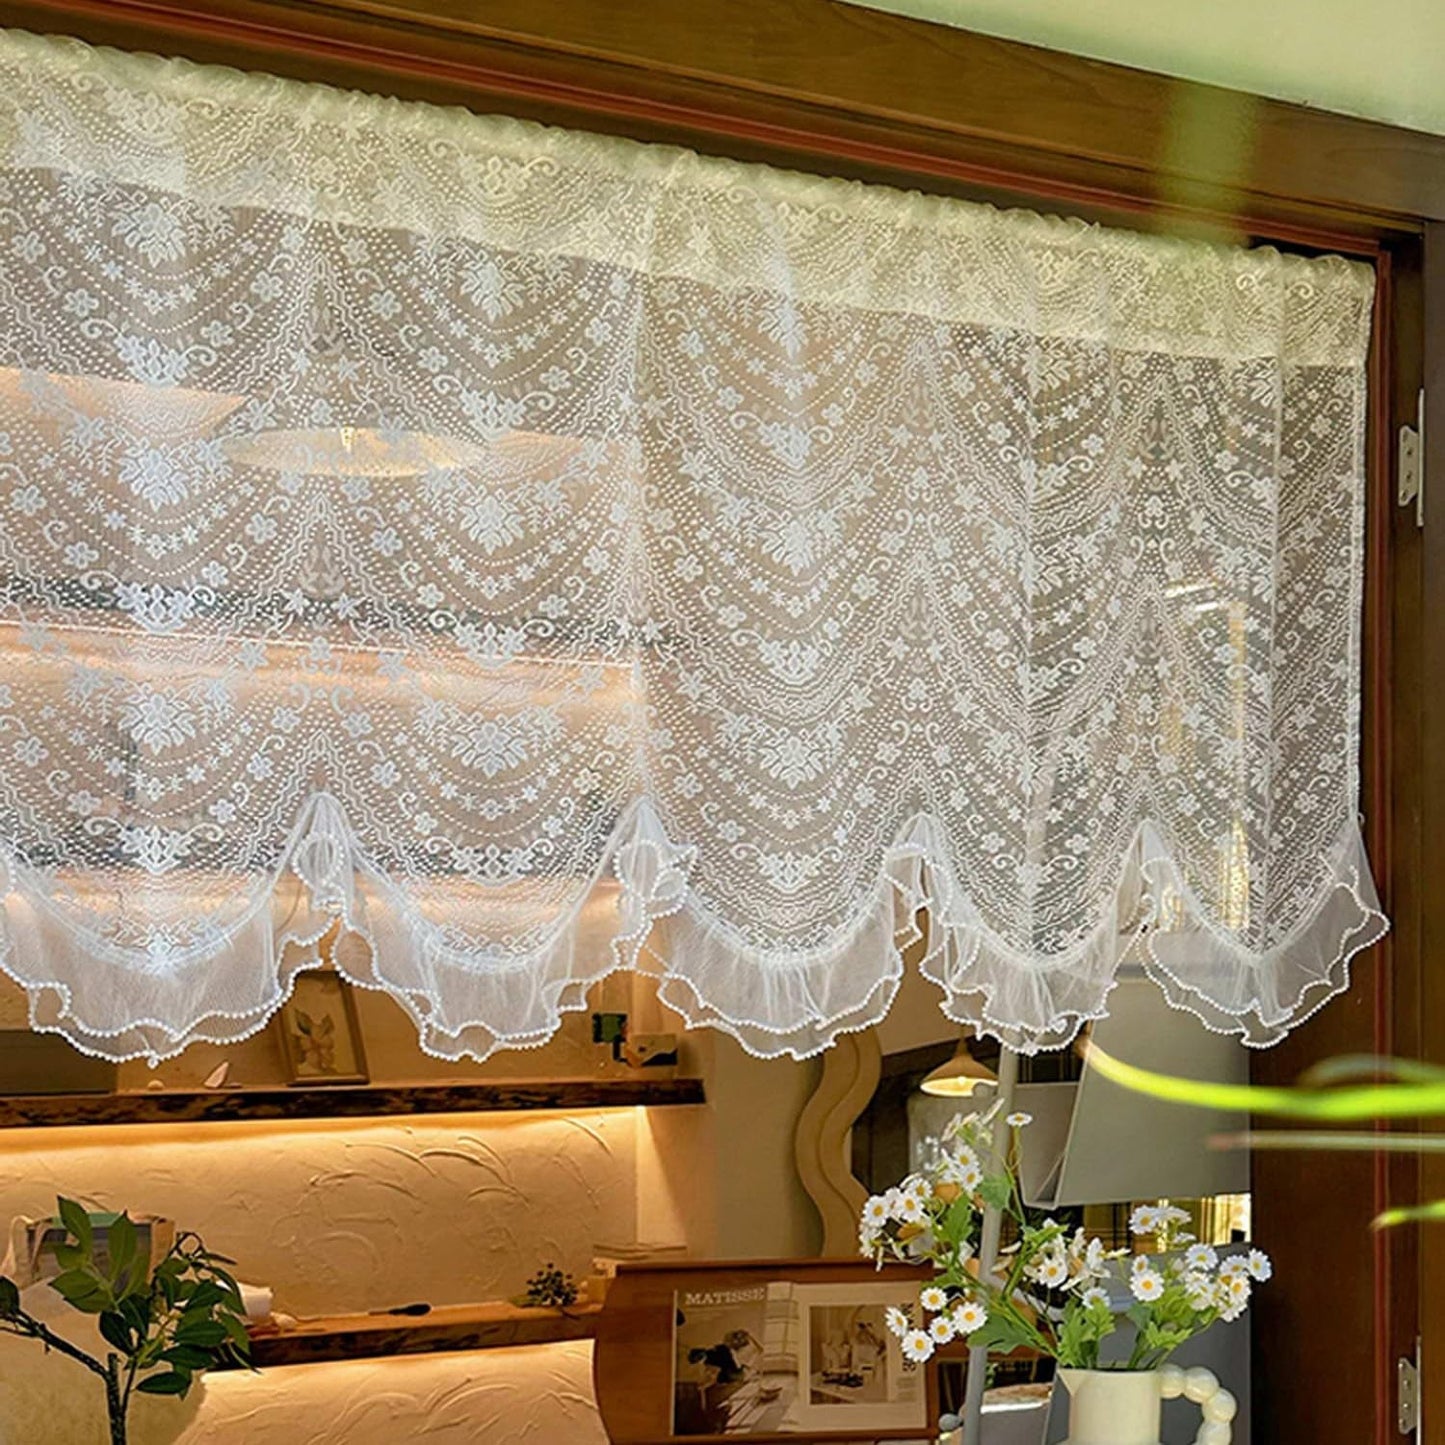 Elegant Ivory Lace Short Curtains Half Curtains with Beads for Kitchen Small Window Ruffled Valance Semi Sheer Tulle Small Curtain Tiers 1 Panel 22 Inch Wide X 24 Inch Long